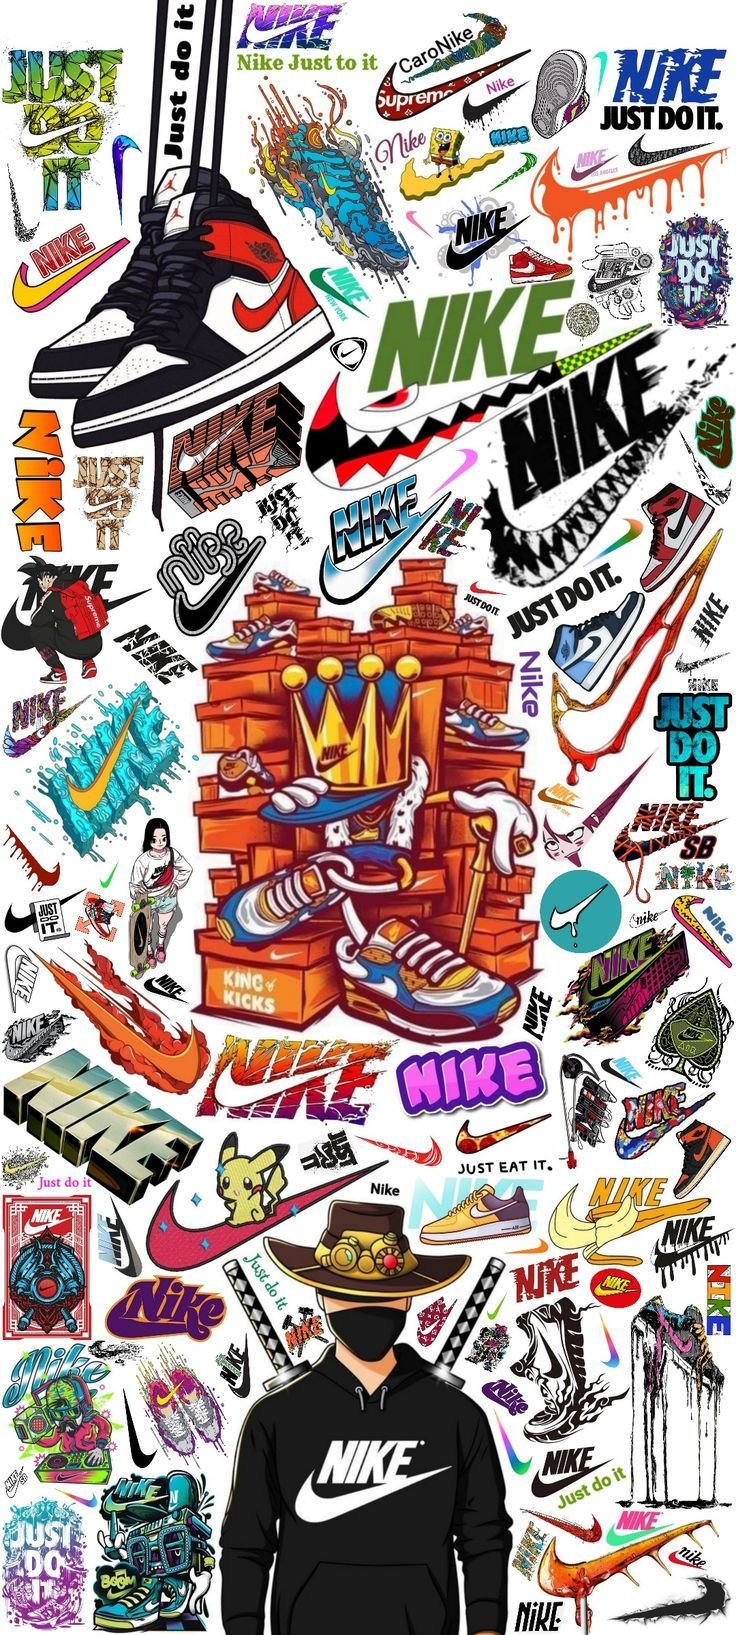 Nike Shoes Live Wallpaper on Graffiti Background - free download